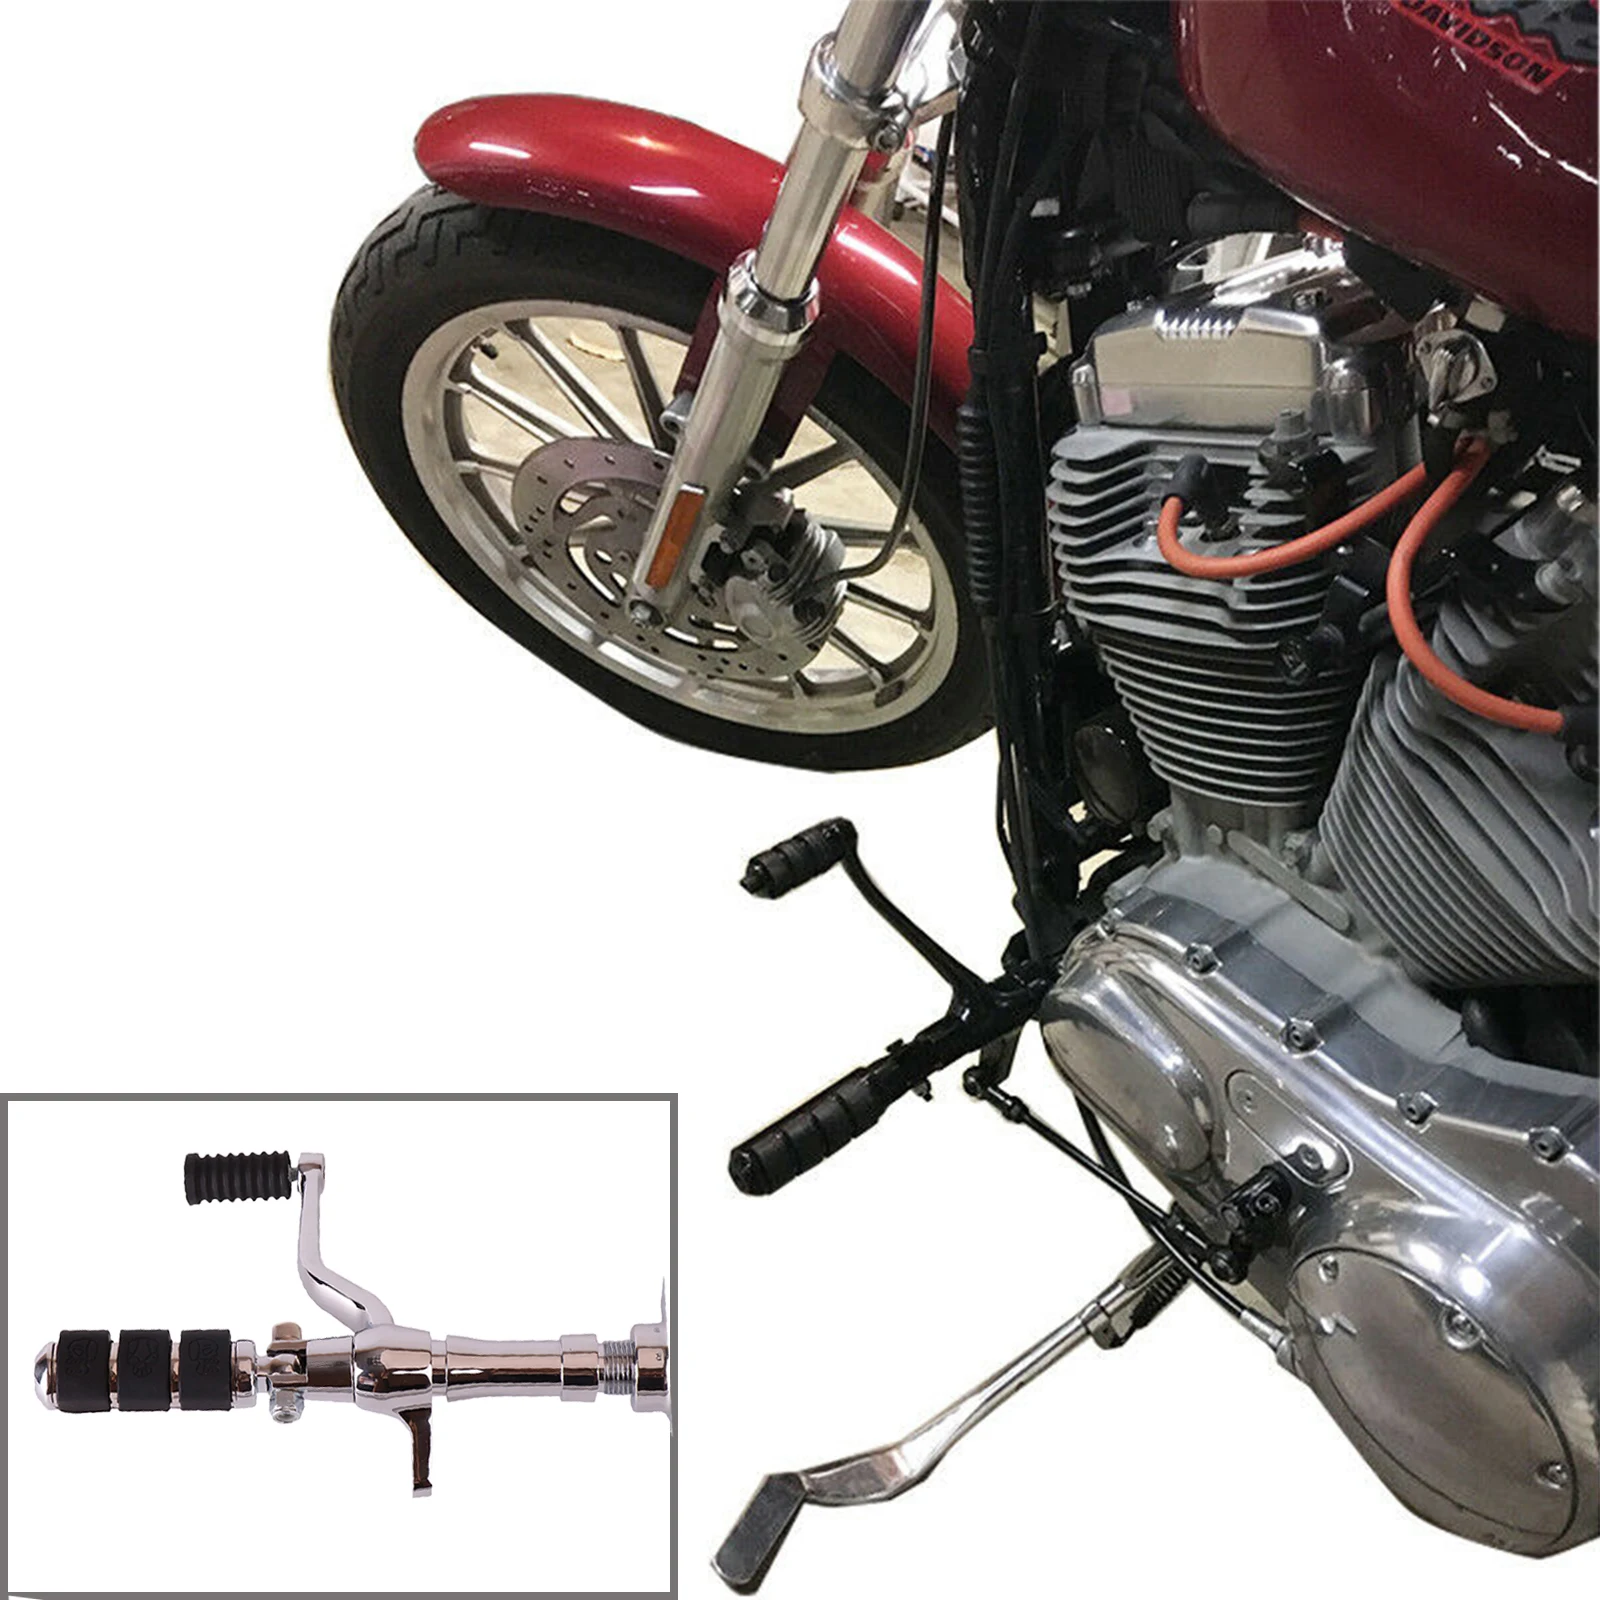 

For Sportster 883 1200 Front Foot Pegs Levers New Forward Controls Kit Linkage 2014-2020 Aluminum Stainless Steel Left Right